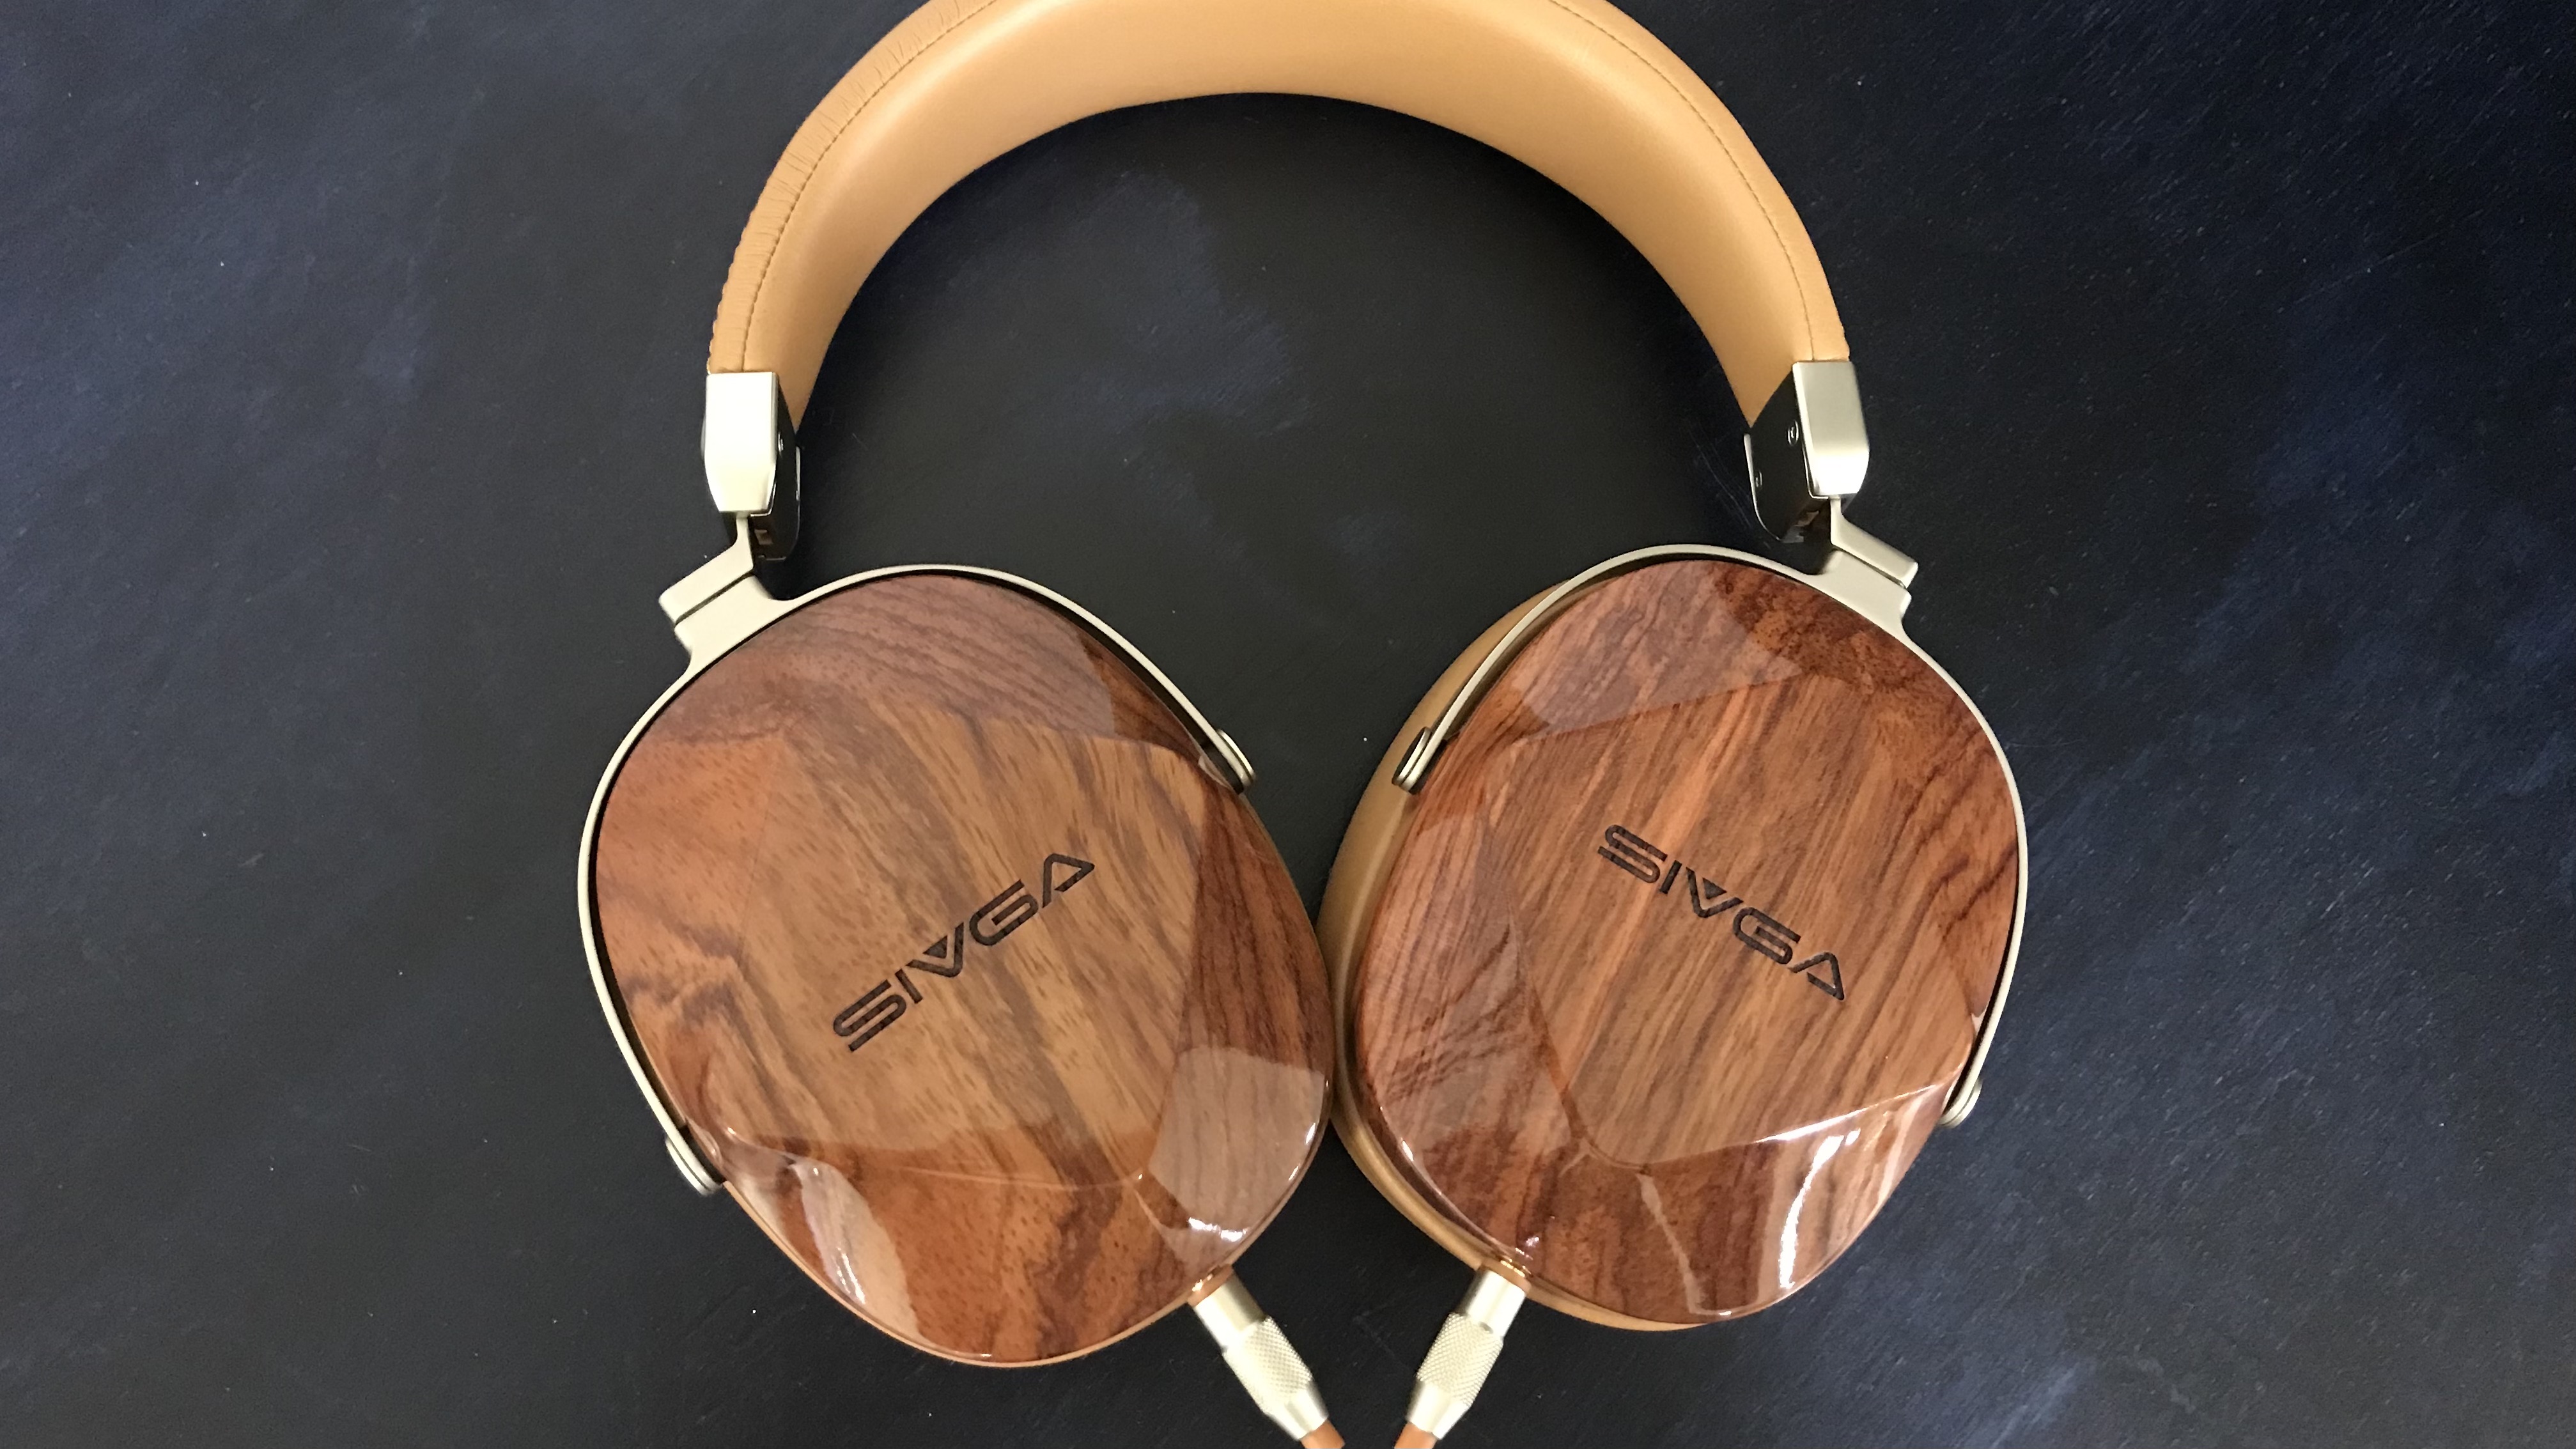 These inexpensive wooden headphones made me dump high-end audio